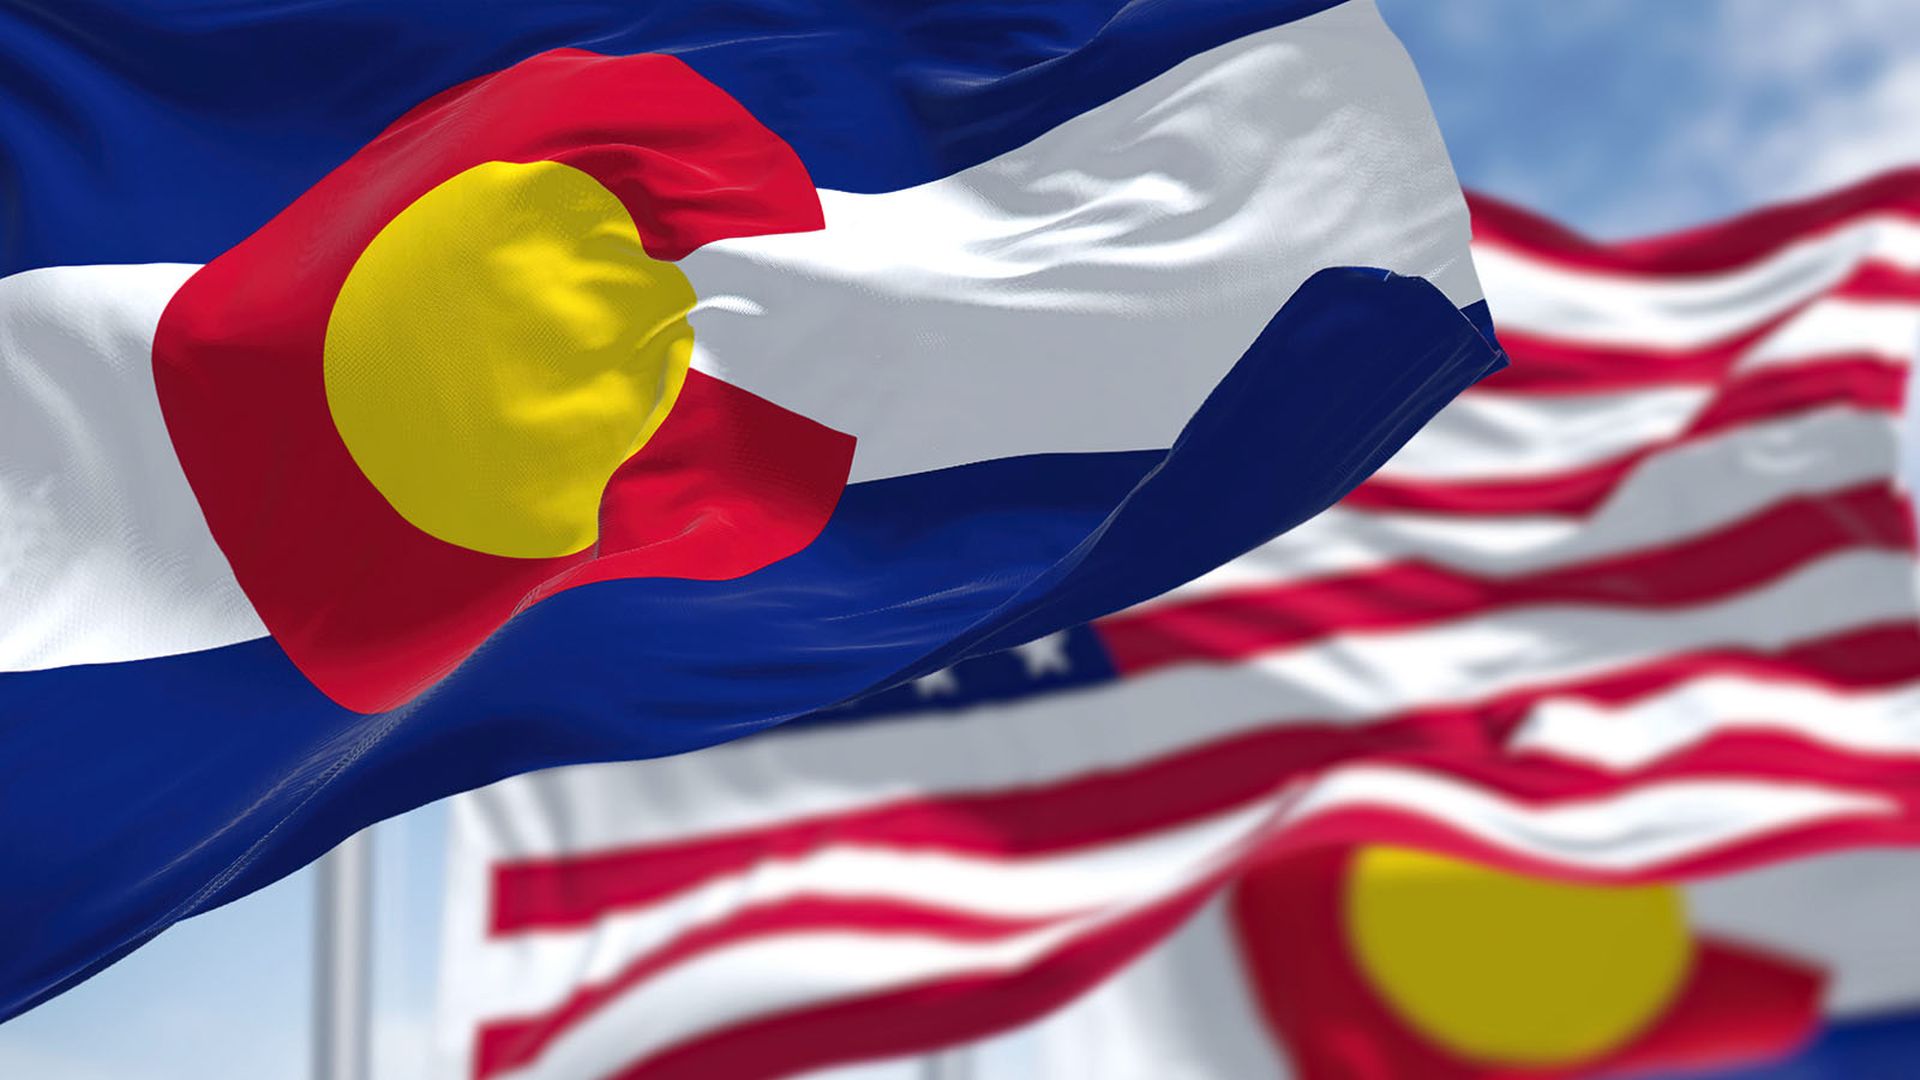 Colorado state flags waving along with the national flag of the United States